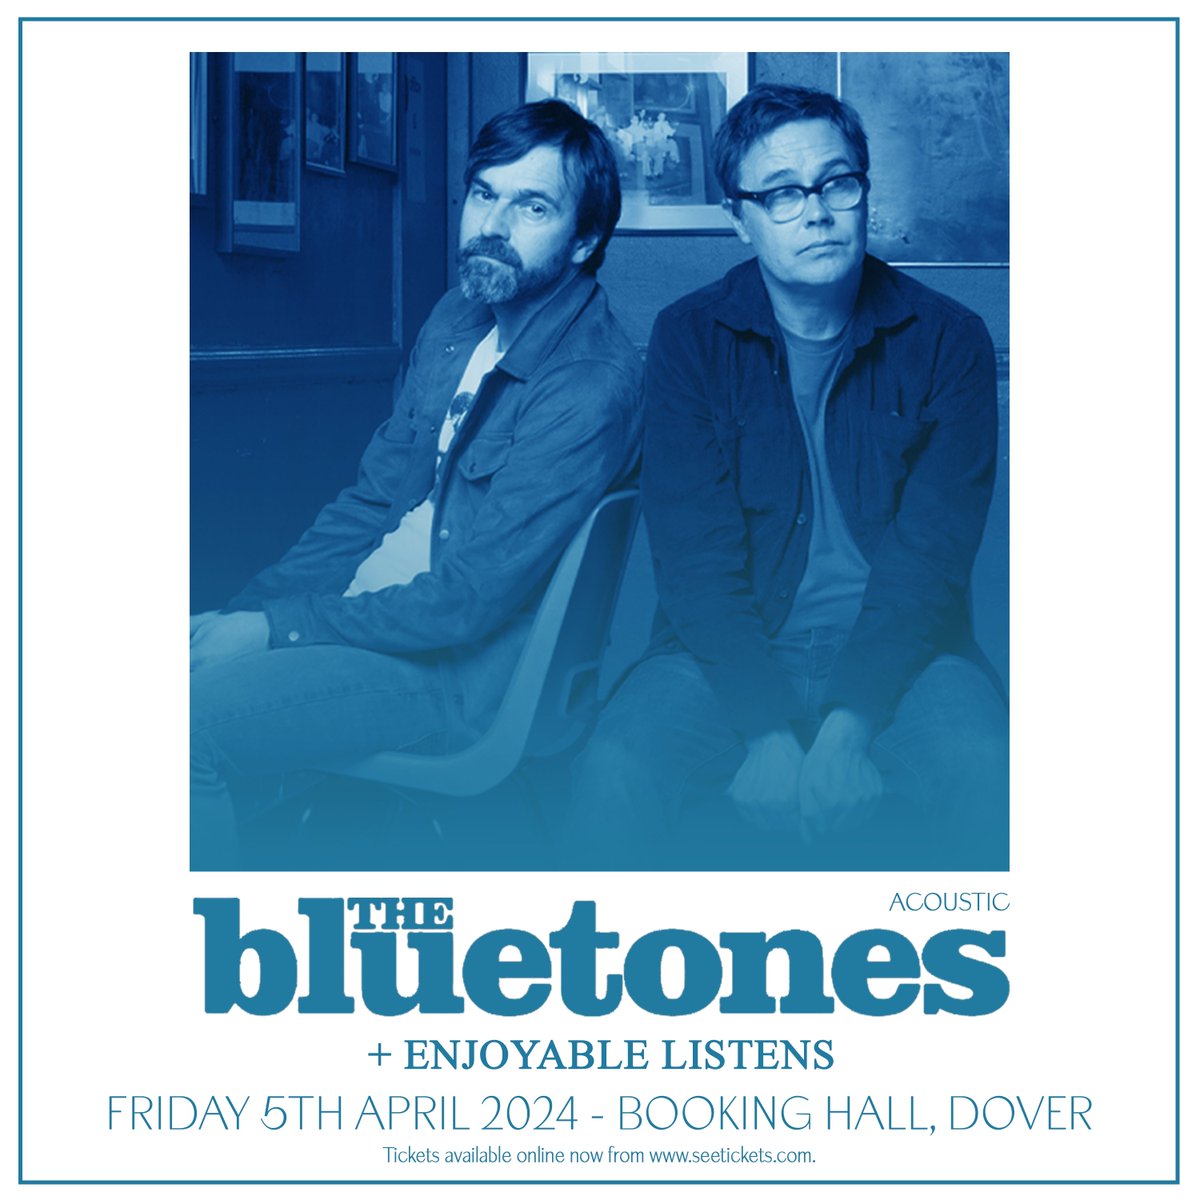 Hitting the stage next week it's iconic Brit pop artists @TheBluetones ! Secure your ticket now!